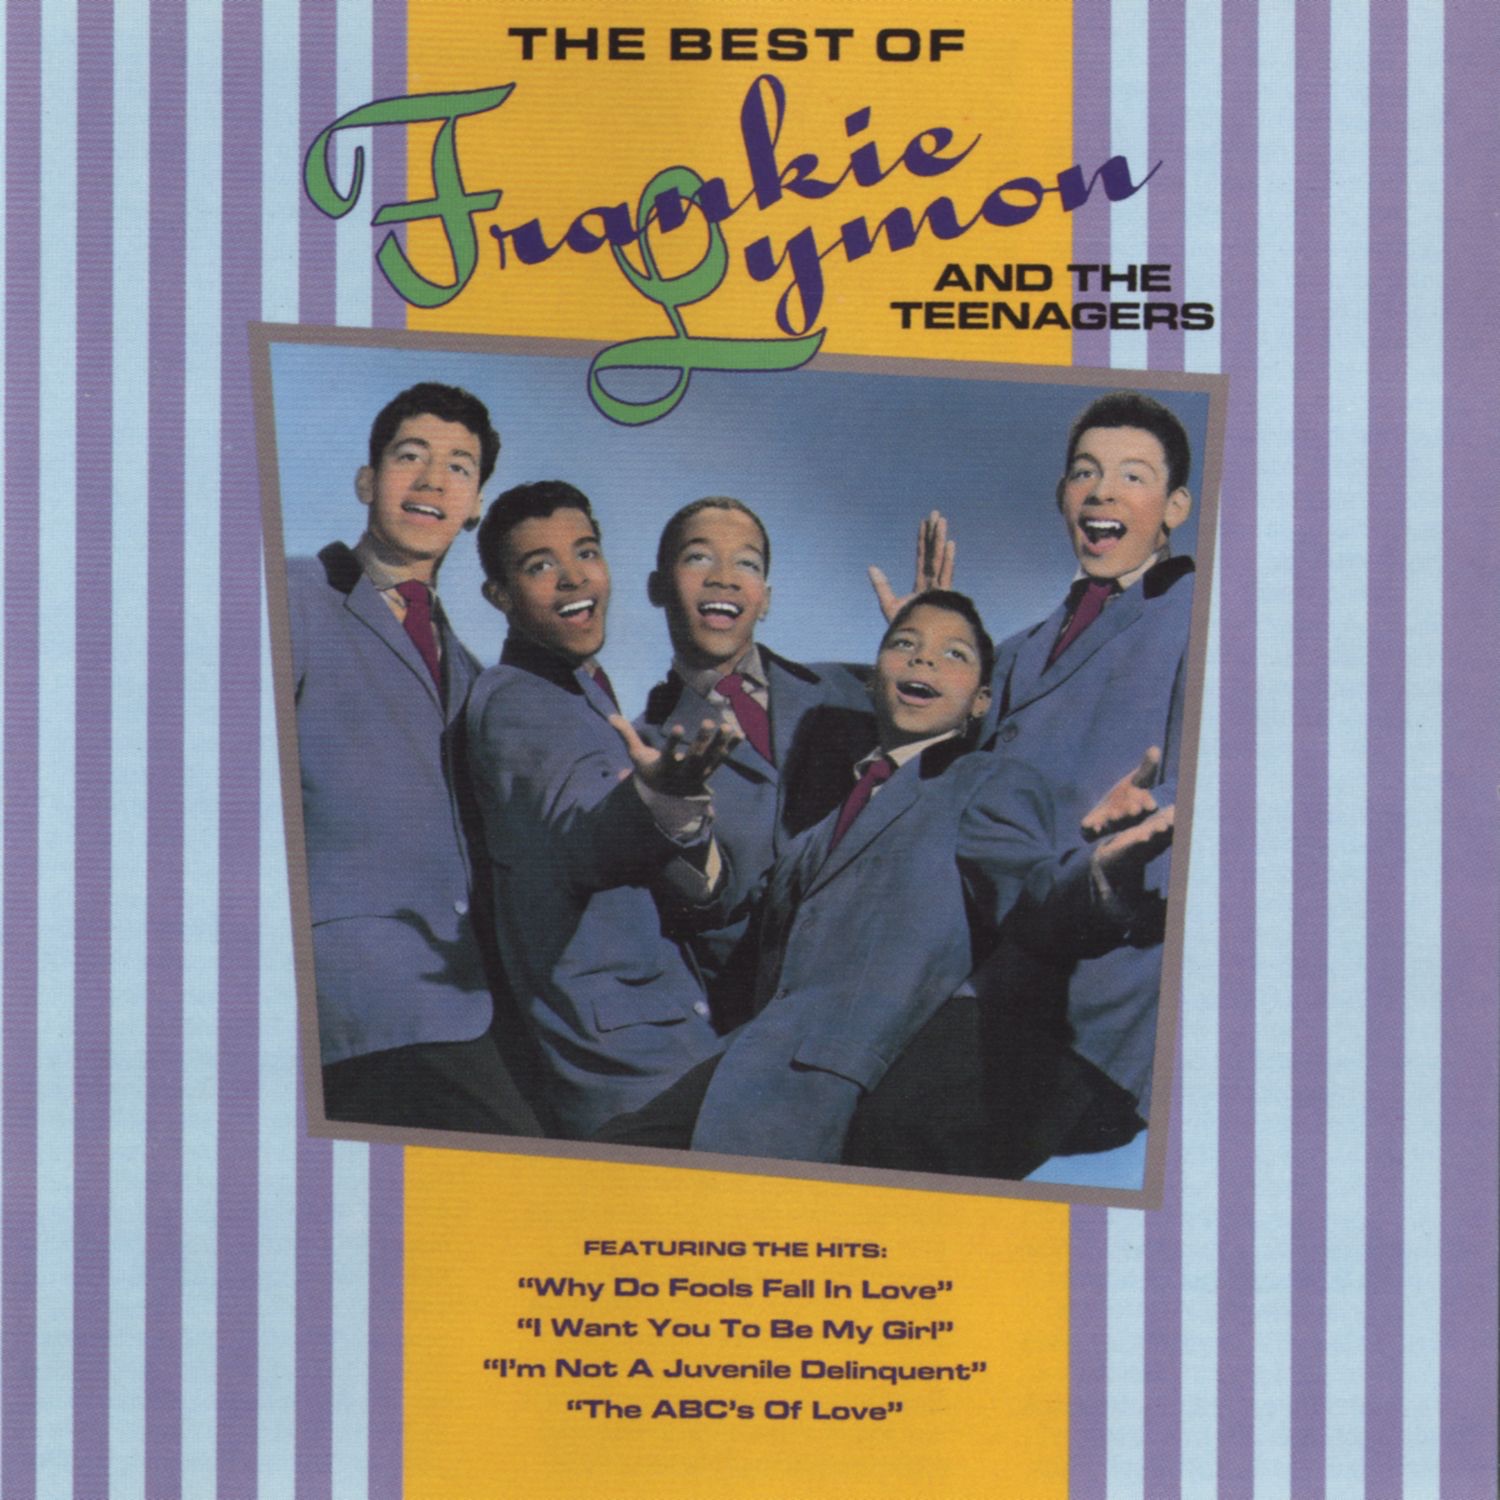 Art for Why Do Fools Fall In Love by Frankie Lymon & The Teenagers